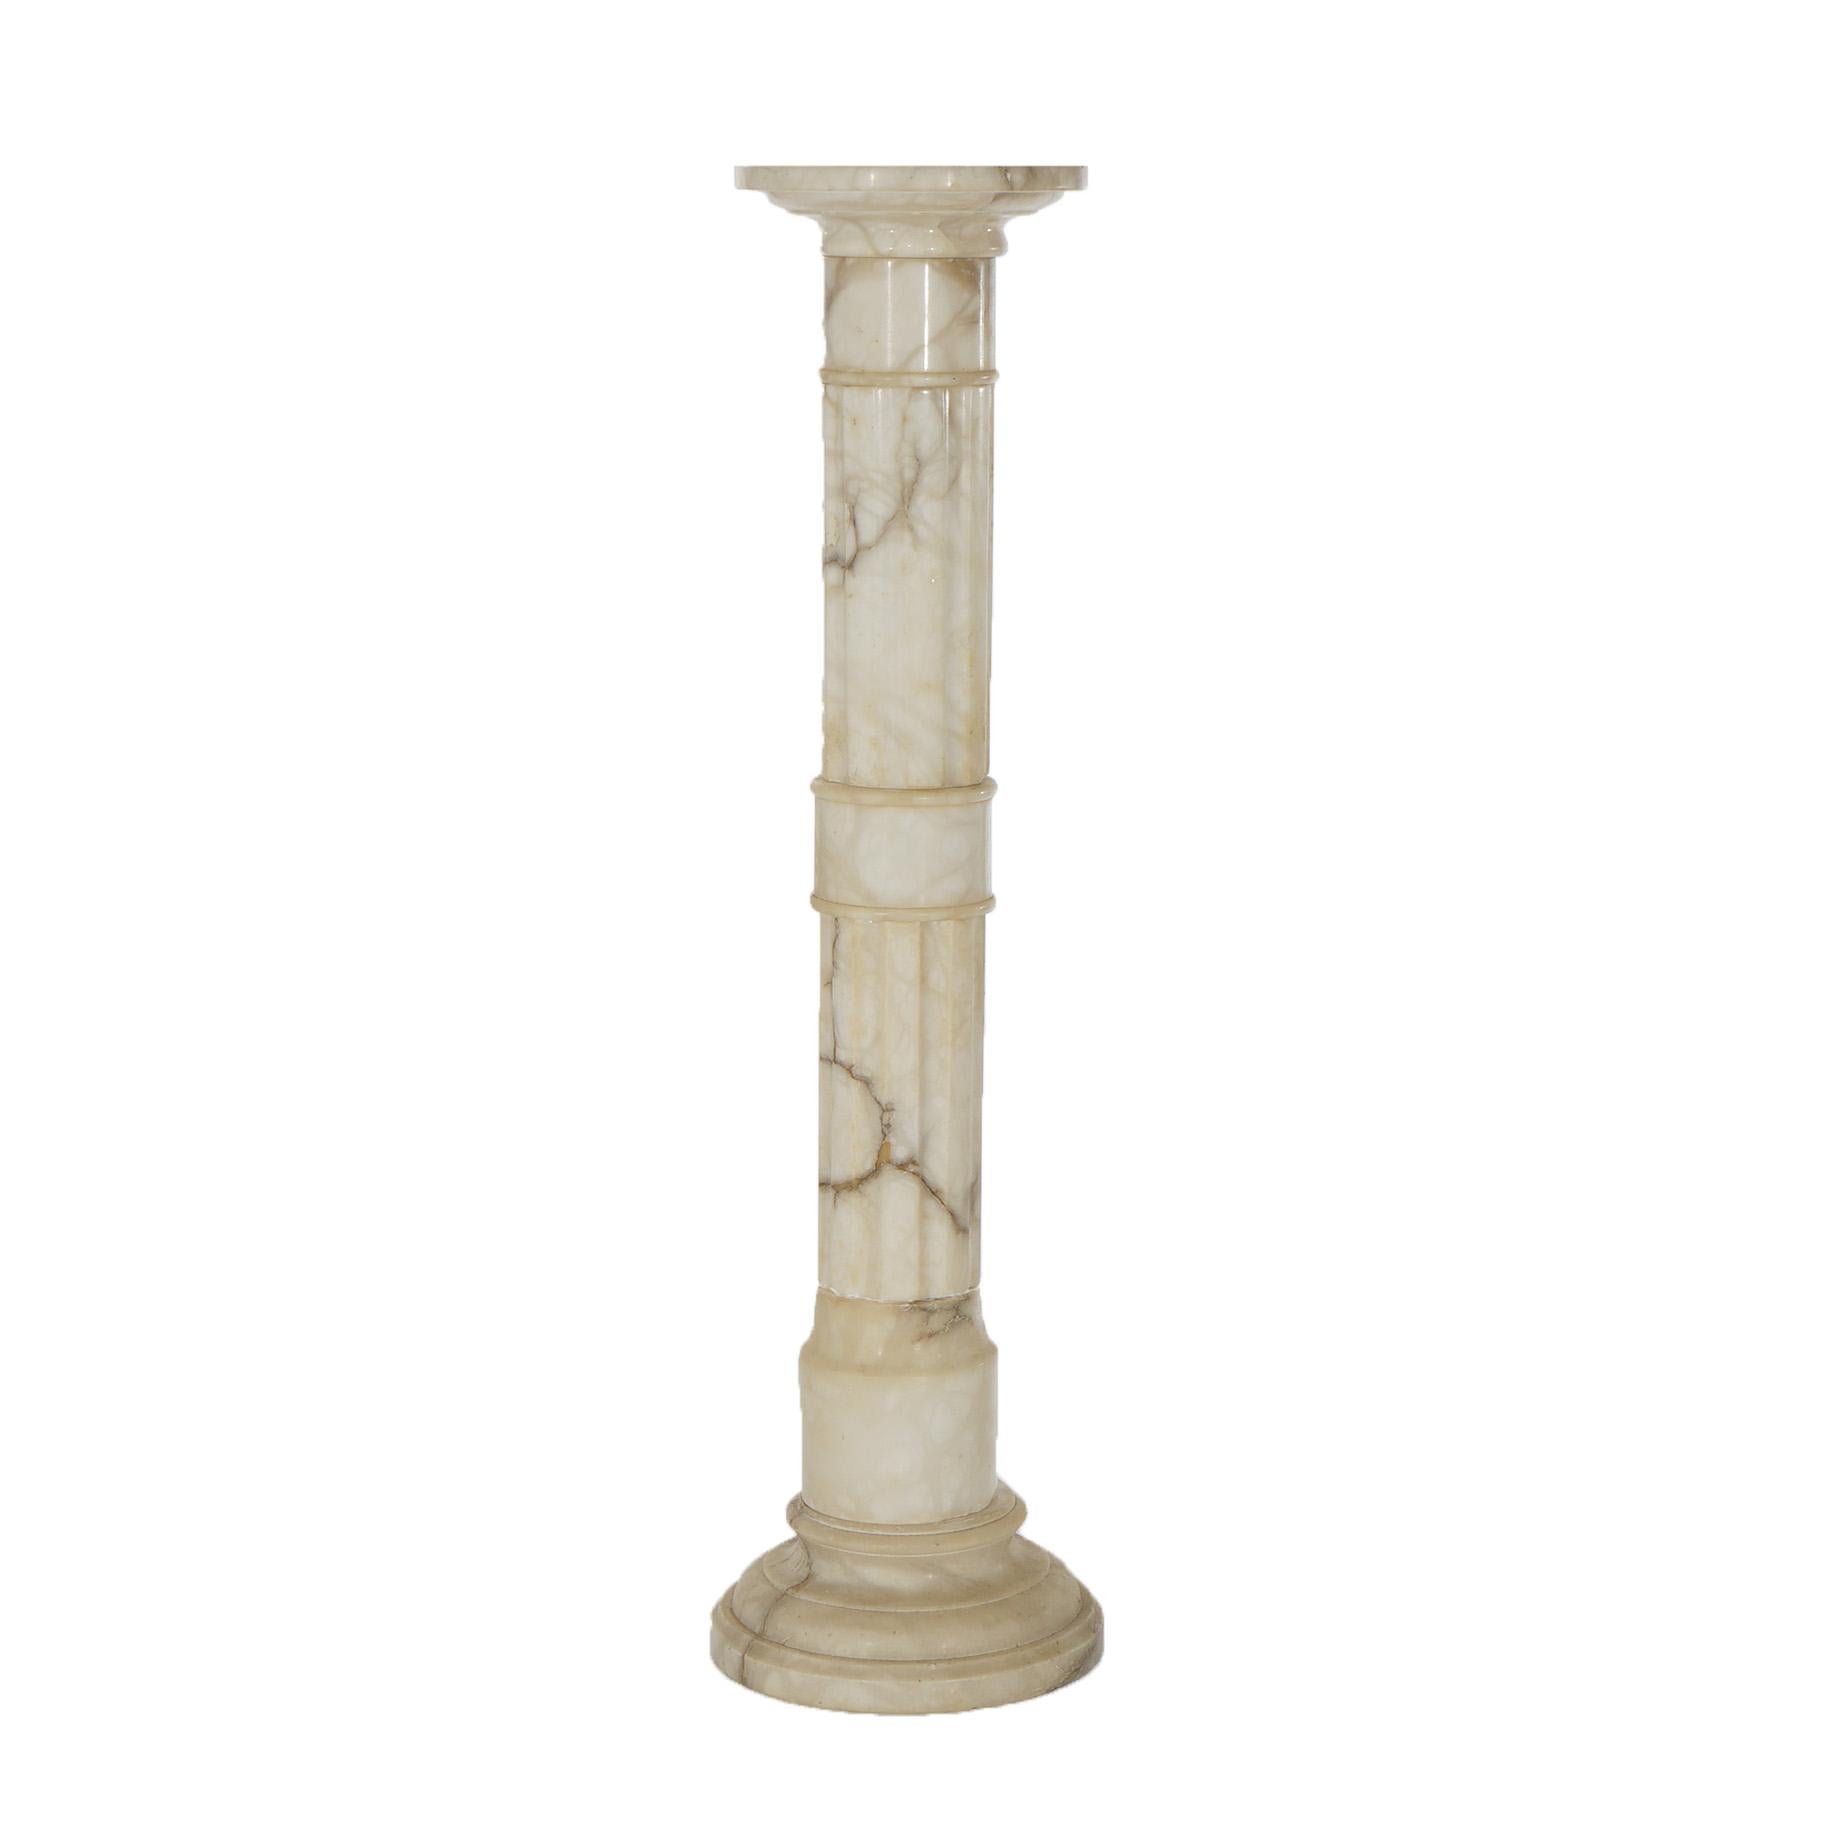 Antique Neoclassical Marble Sculpture Display Pedestal with Reeded & Banded Column C1890

Measures- 42.5''H x 12''W x 12''D